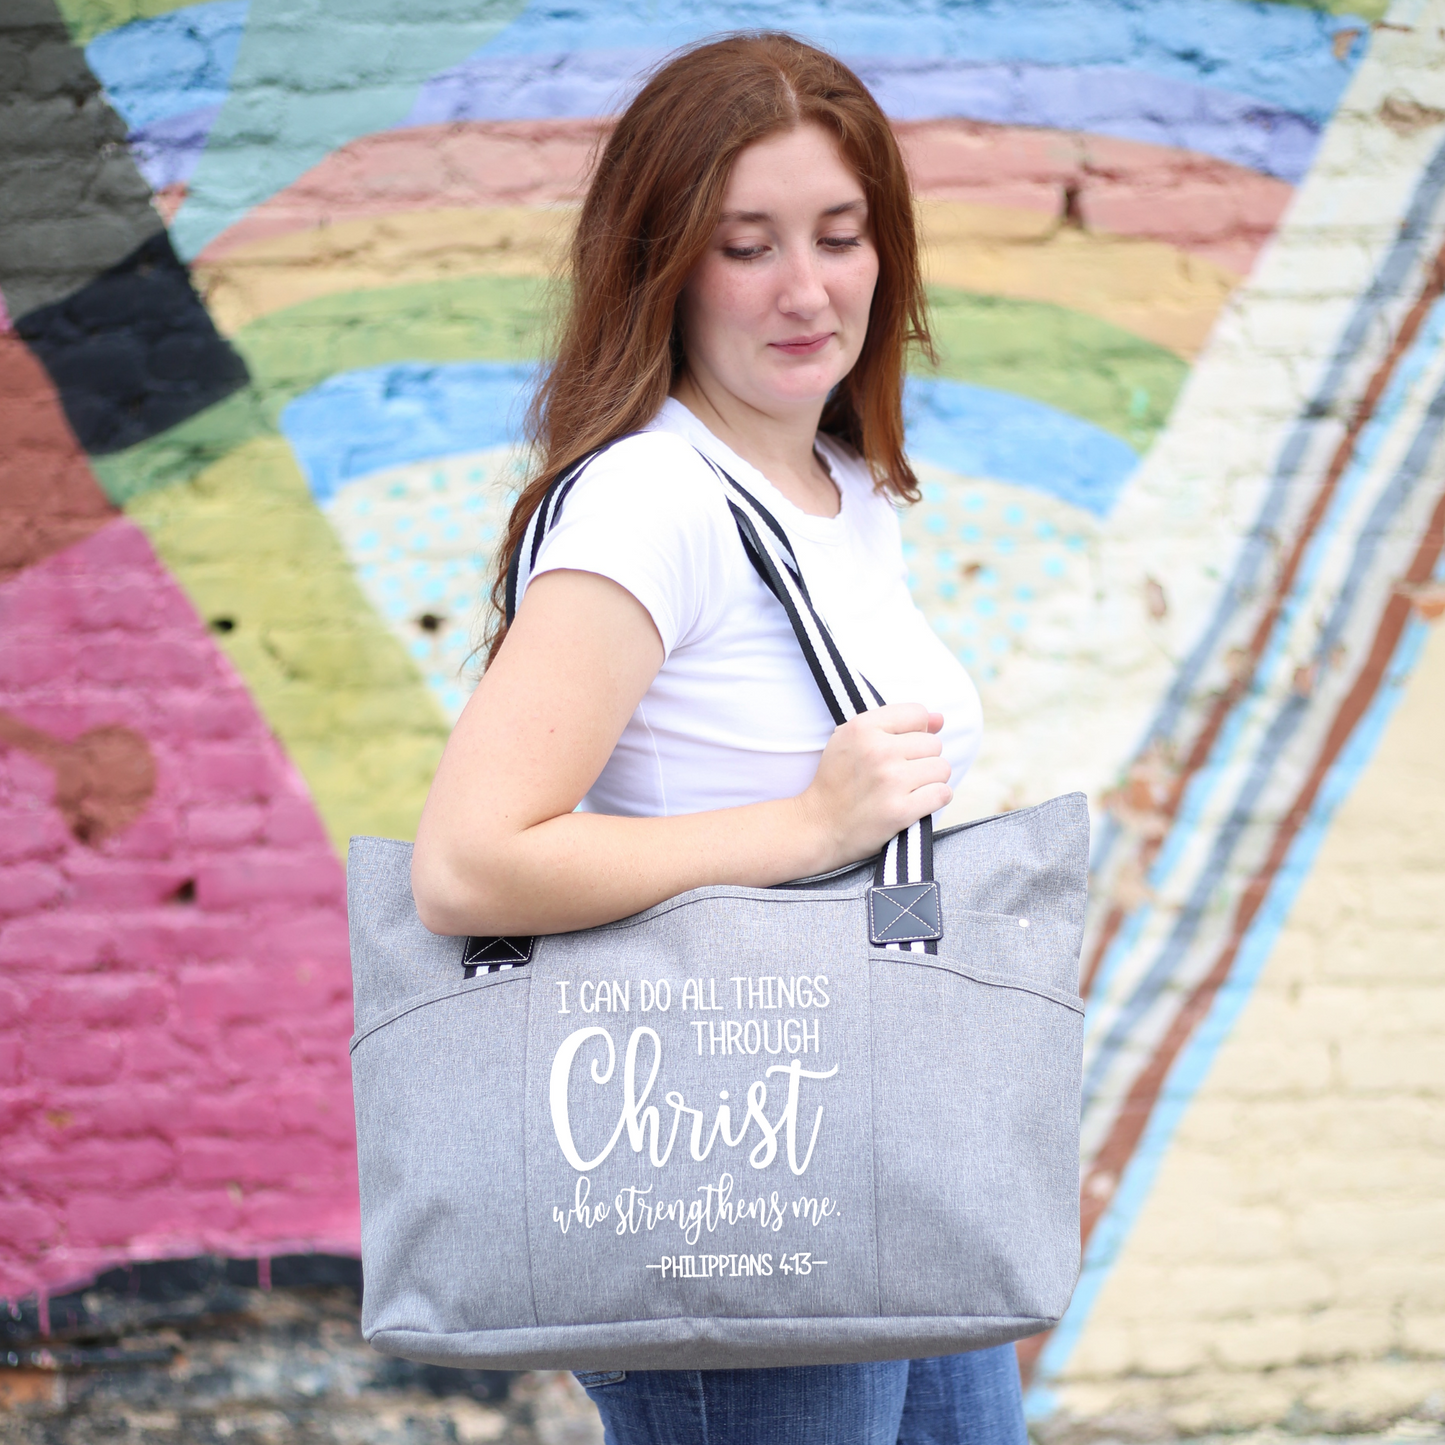 Through Christ All Things Are Possible Tessa Gray Tote Bag